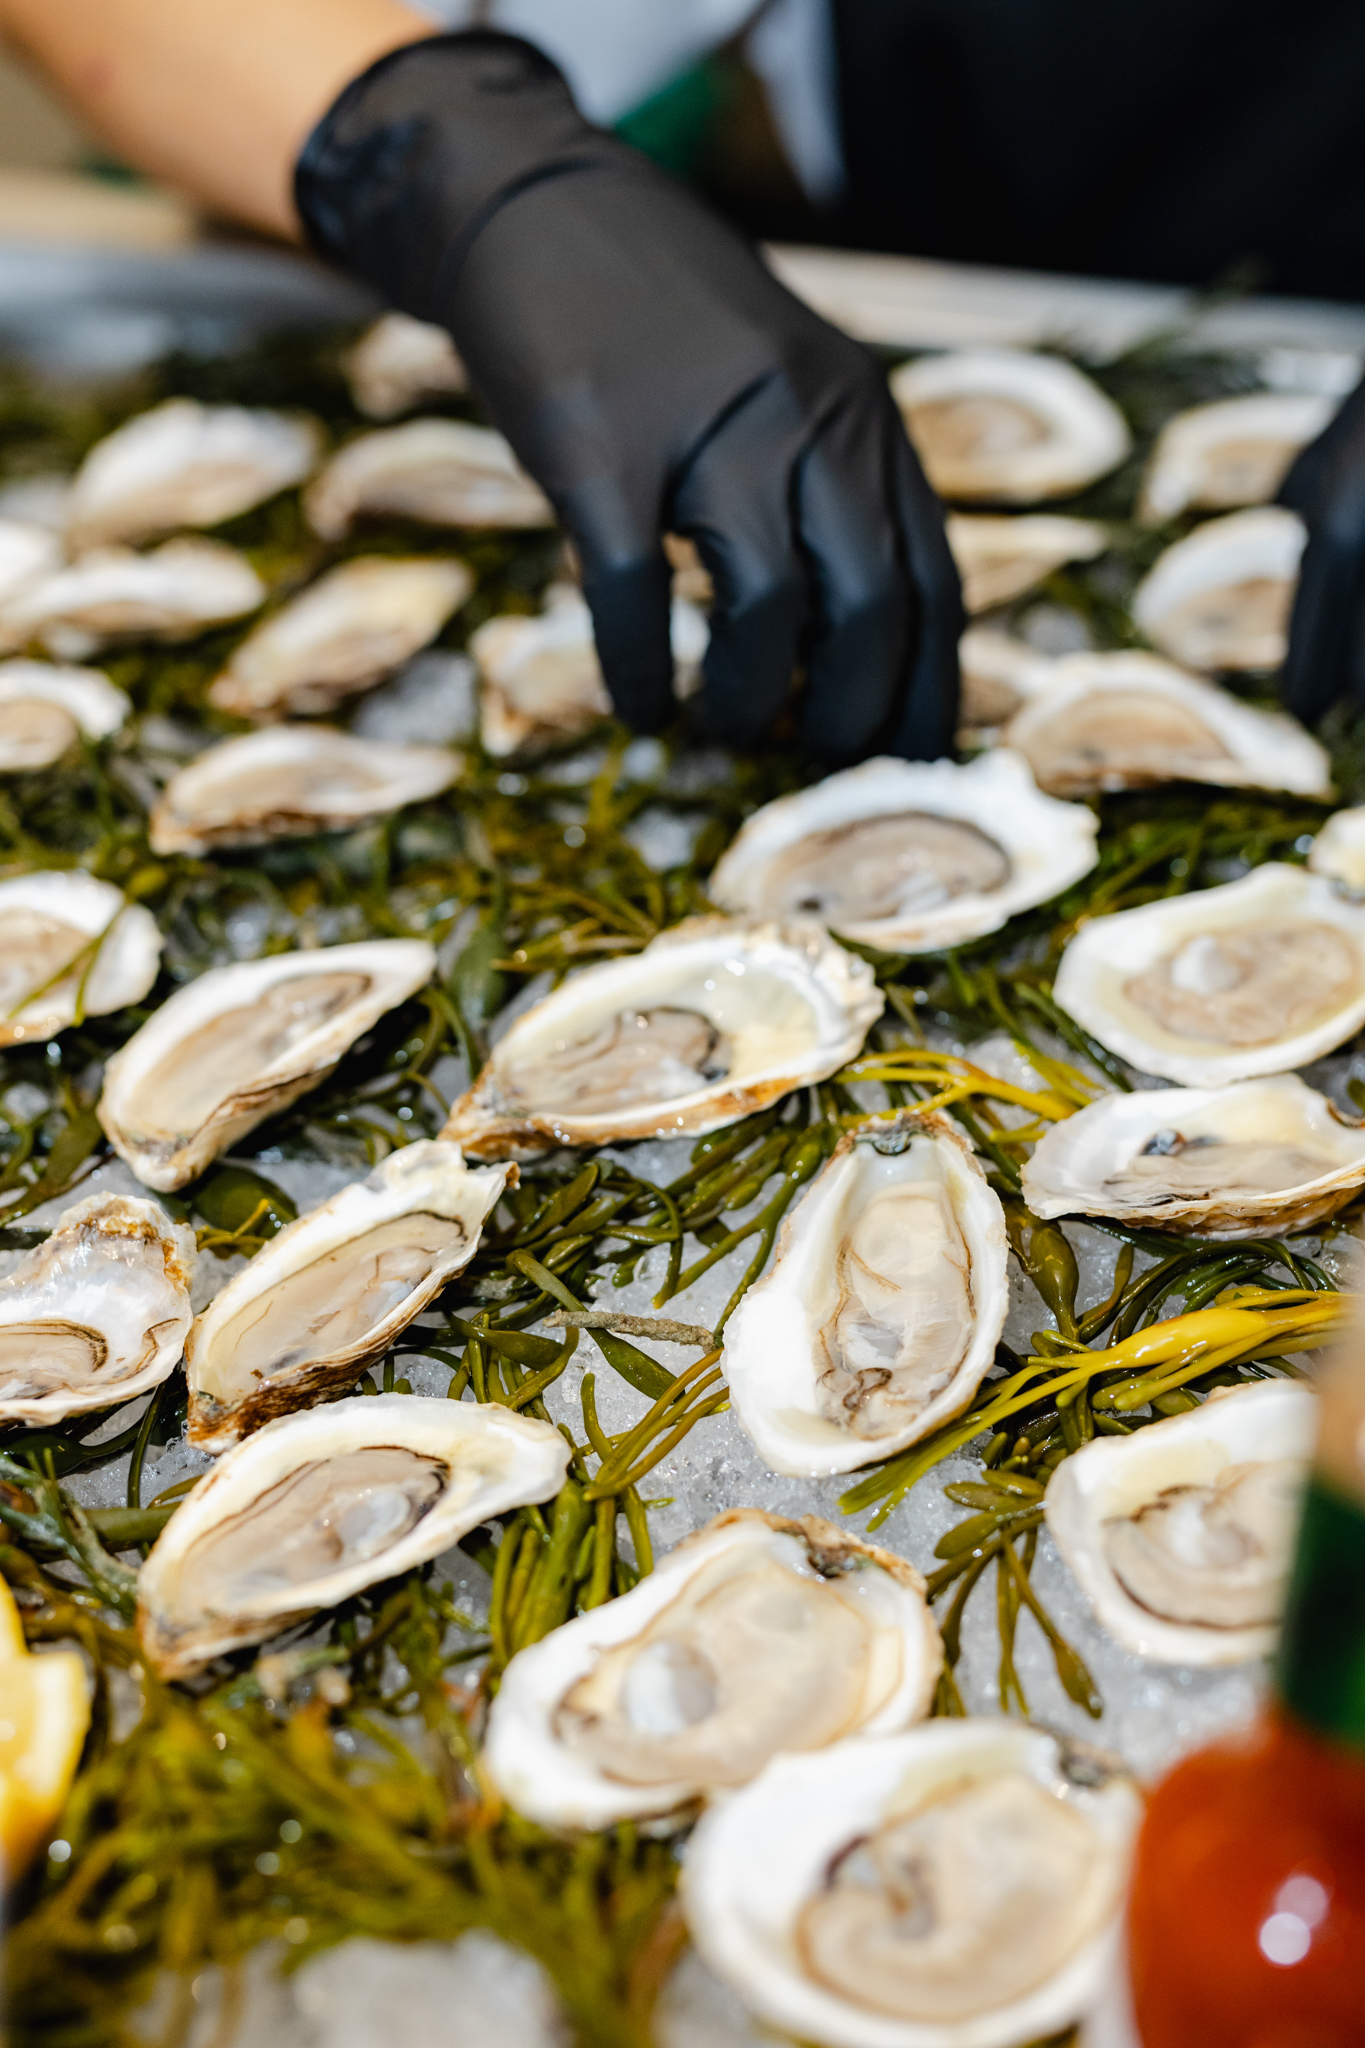 A person is carefully arranging oysters on a tray during a conference.